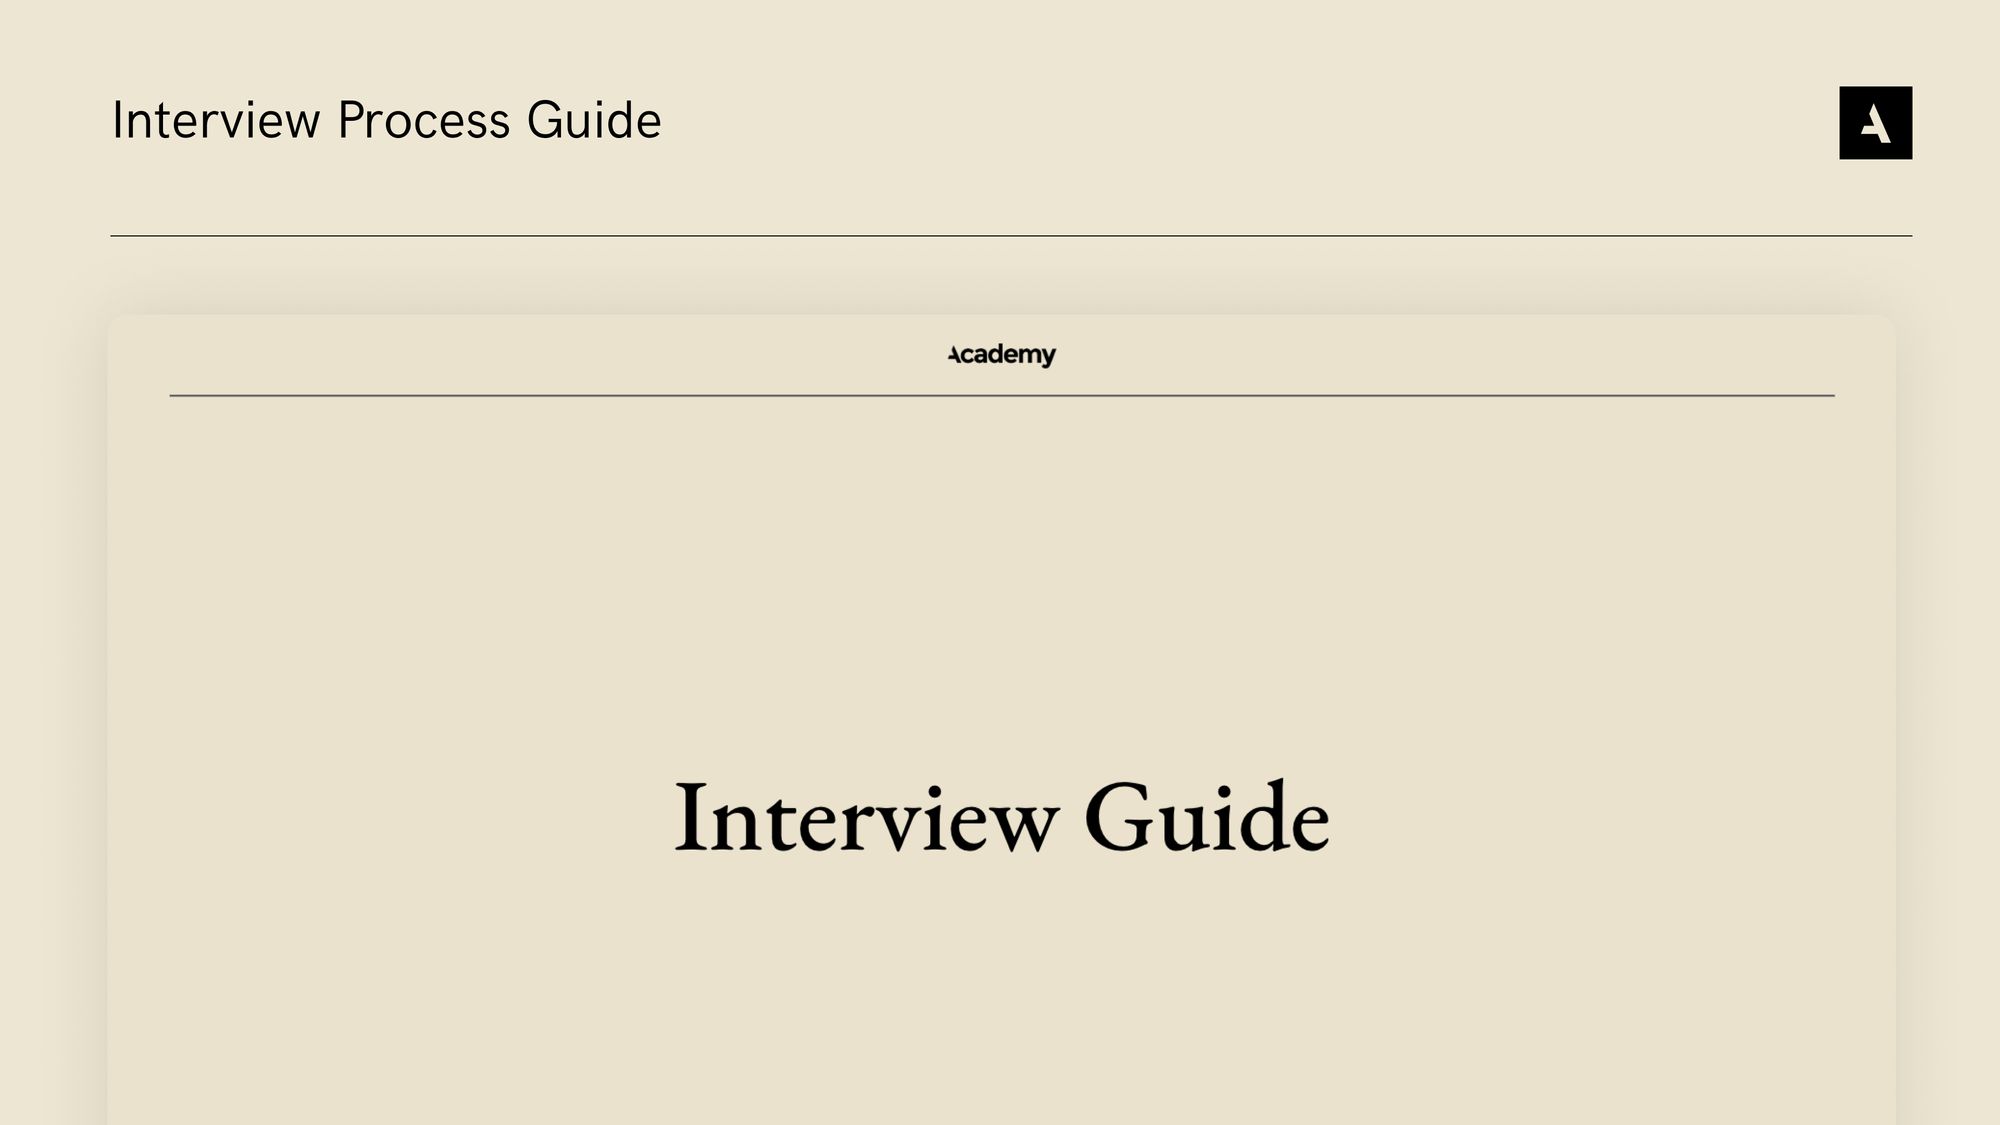 An Image of an Interview Guide Template